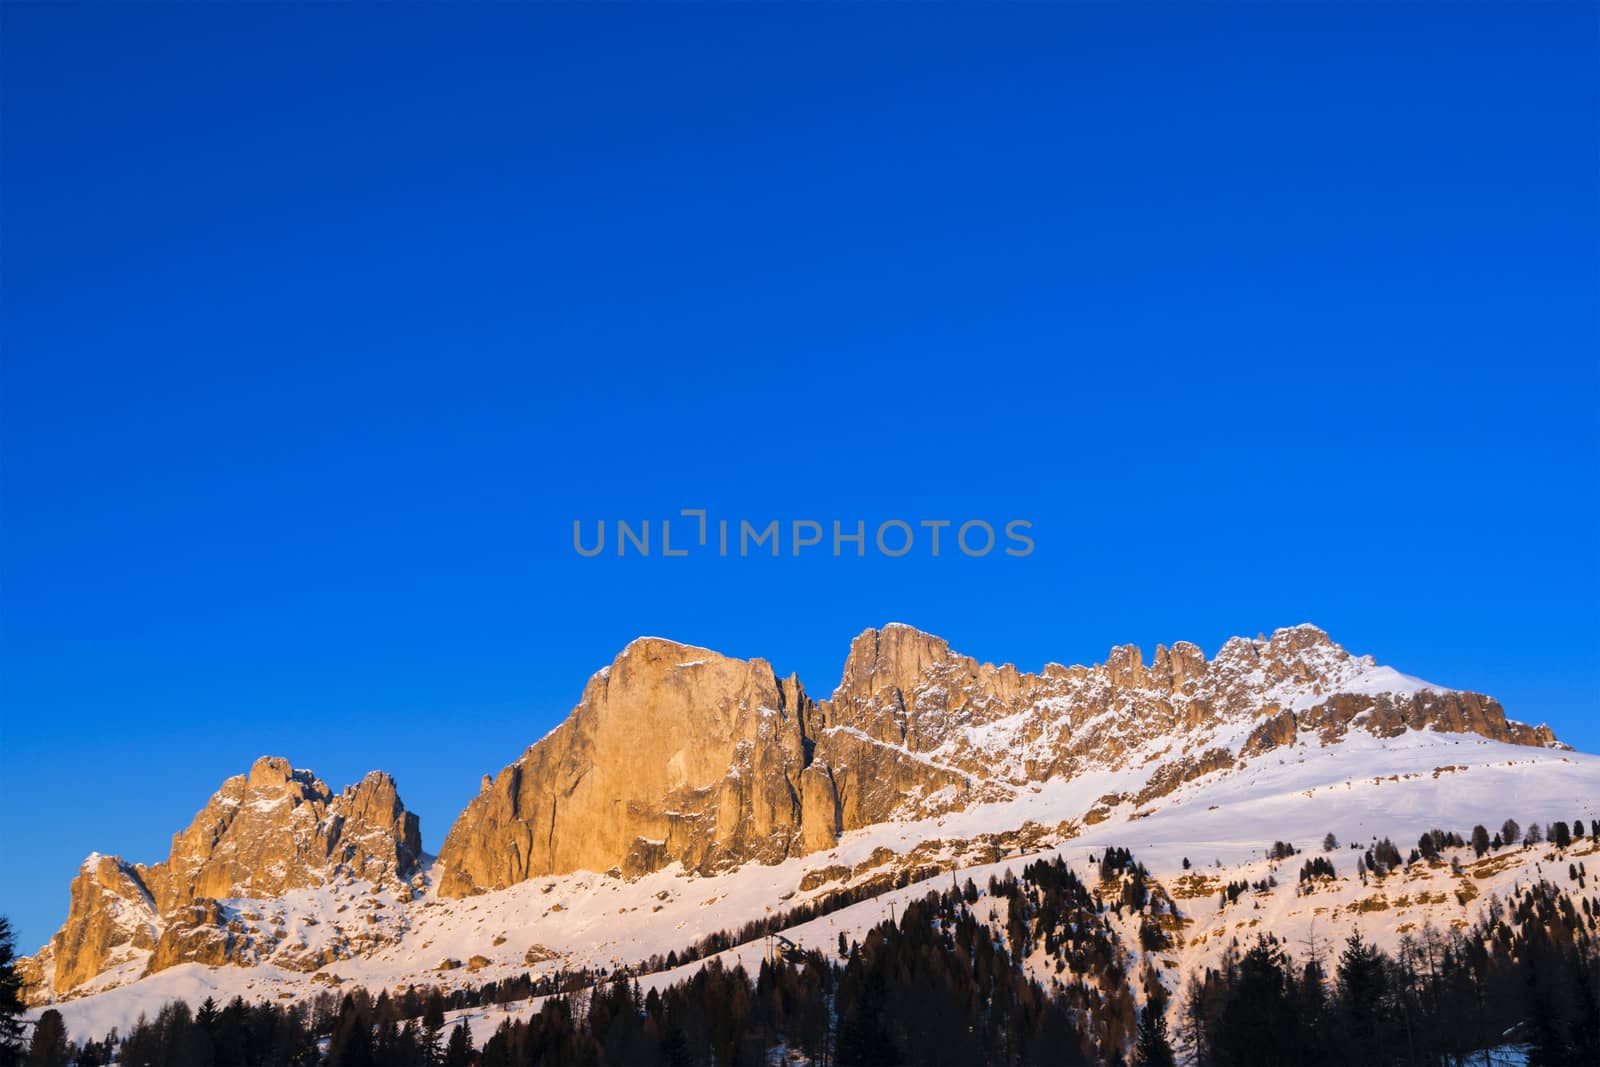 Sunset on the Catinaccio, Dolomite - Italy by Mdc1970